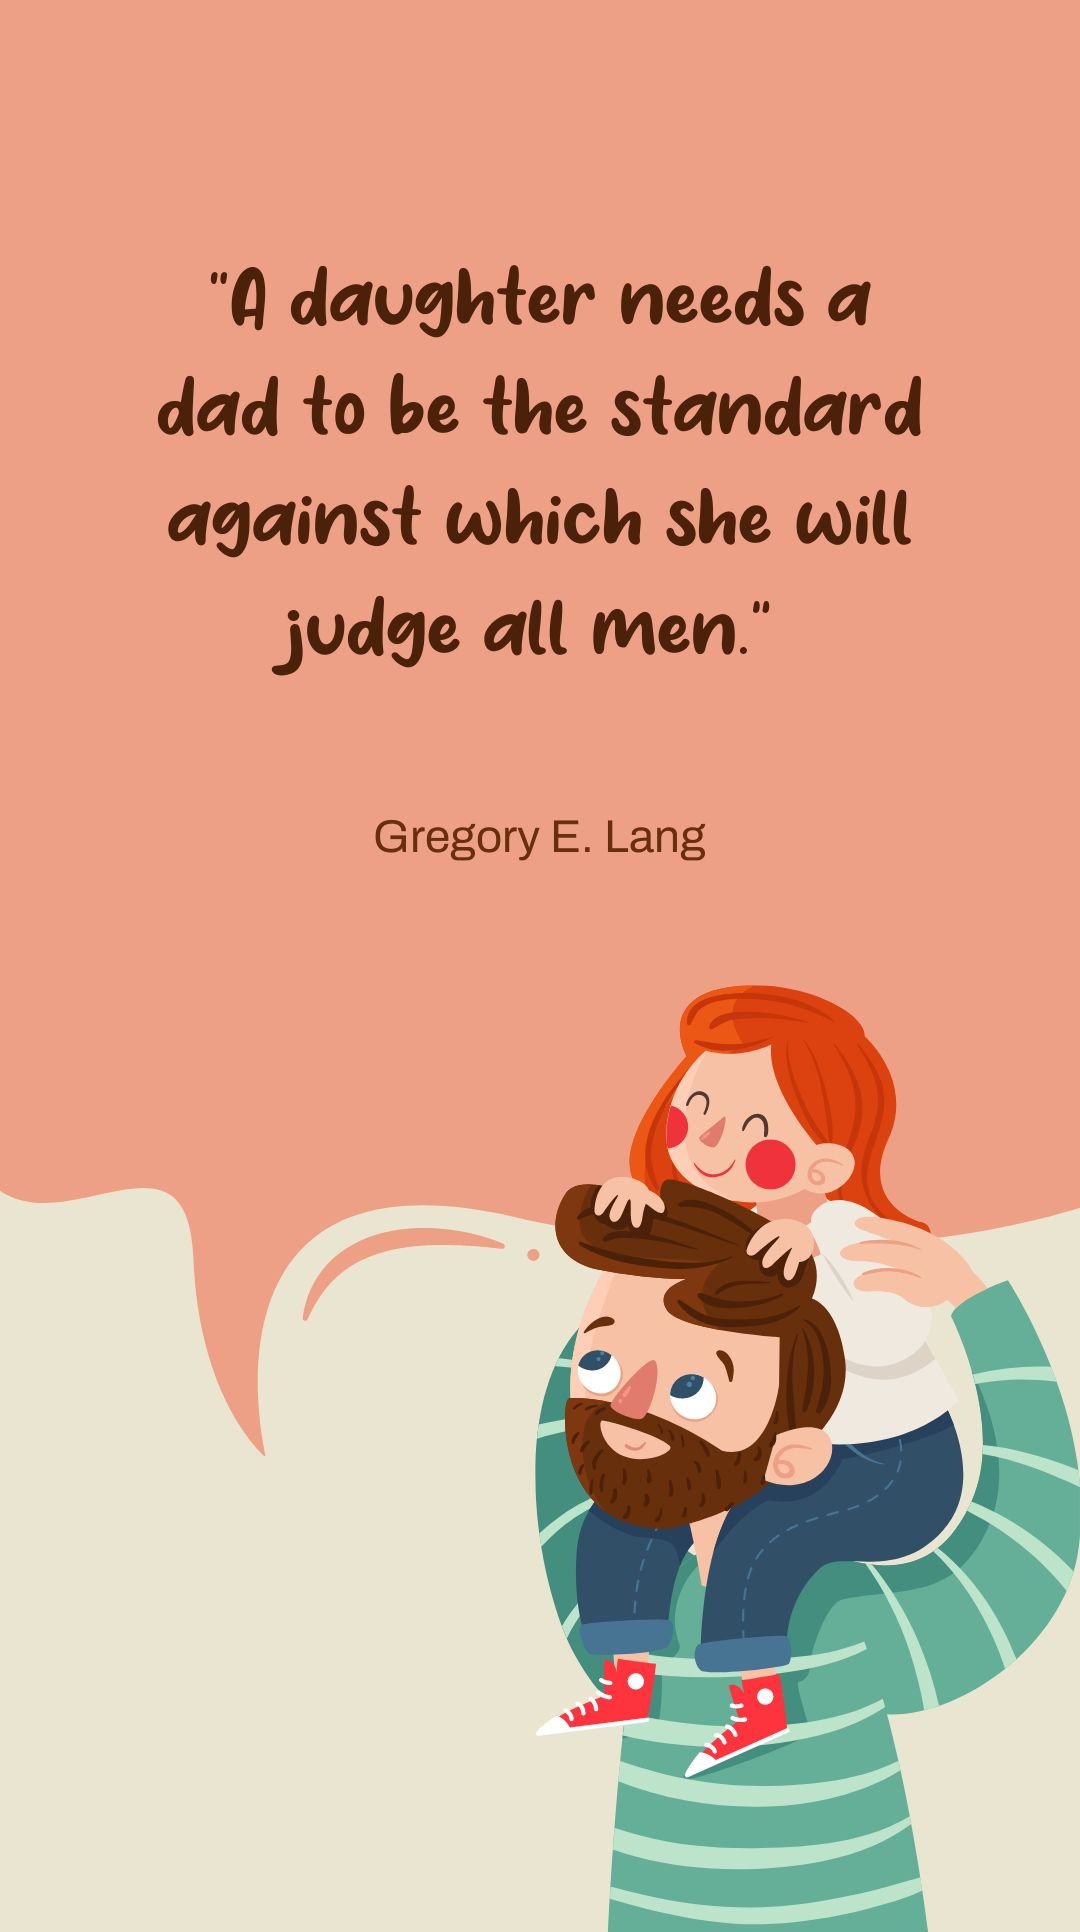 Free Gregory E. Lang - A daughter needs a dad to be the standard against which she will judge all men. in JPG